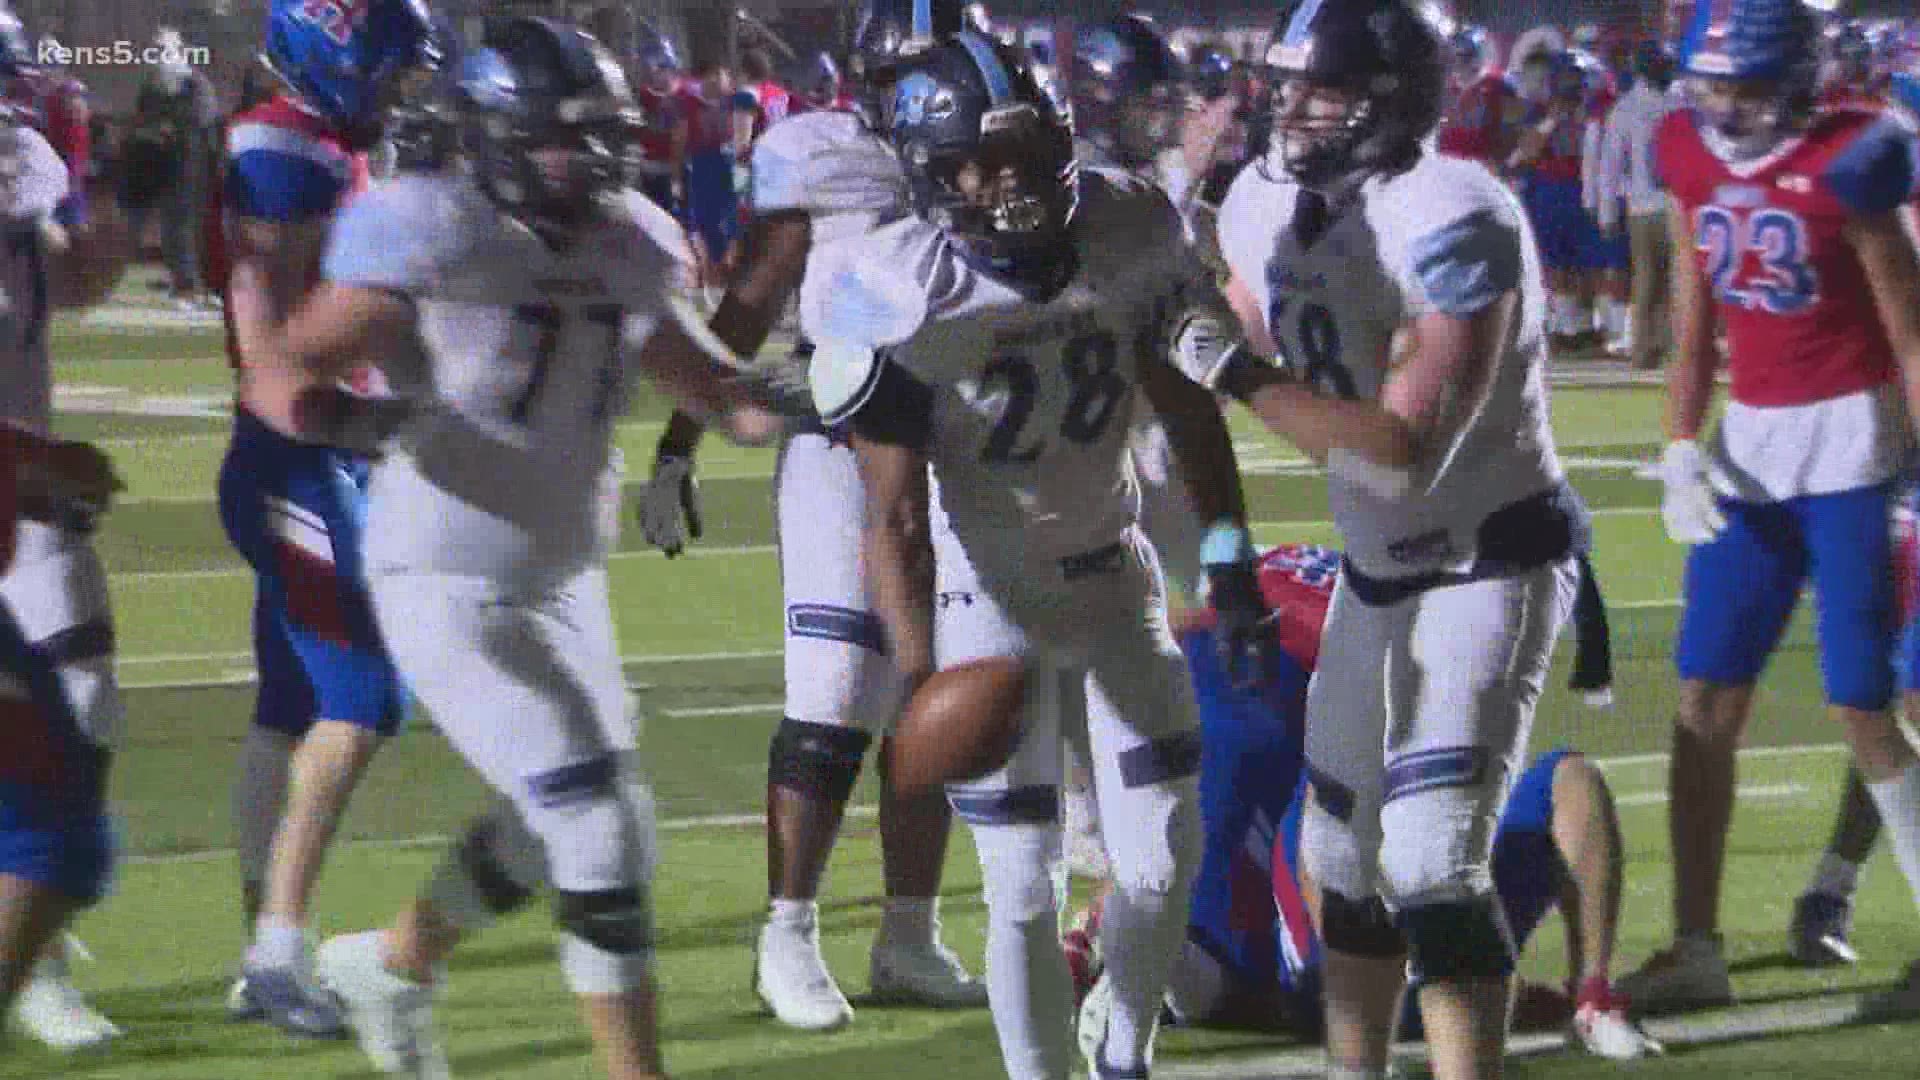 The season came to an end for Hays and Smithson Valley on Friday, but Steele advanced with an overtime victory.